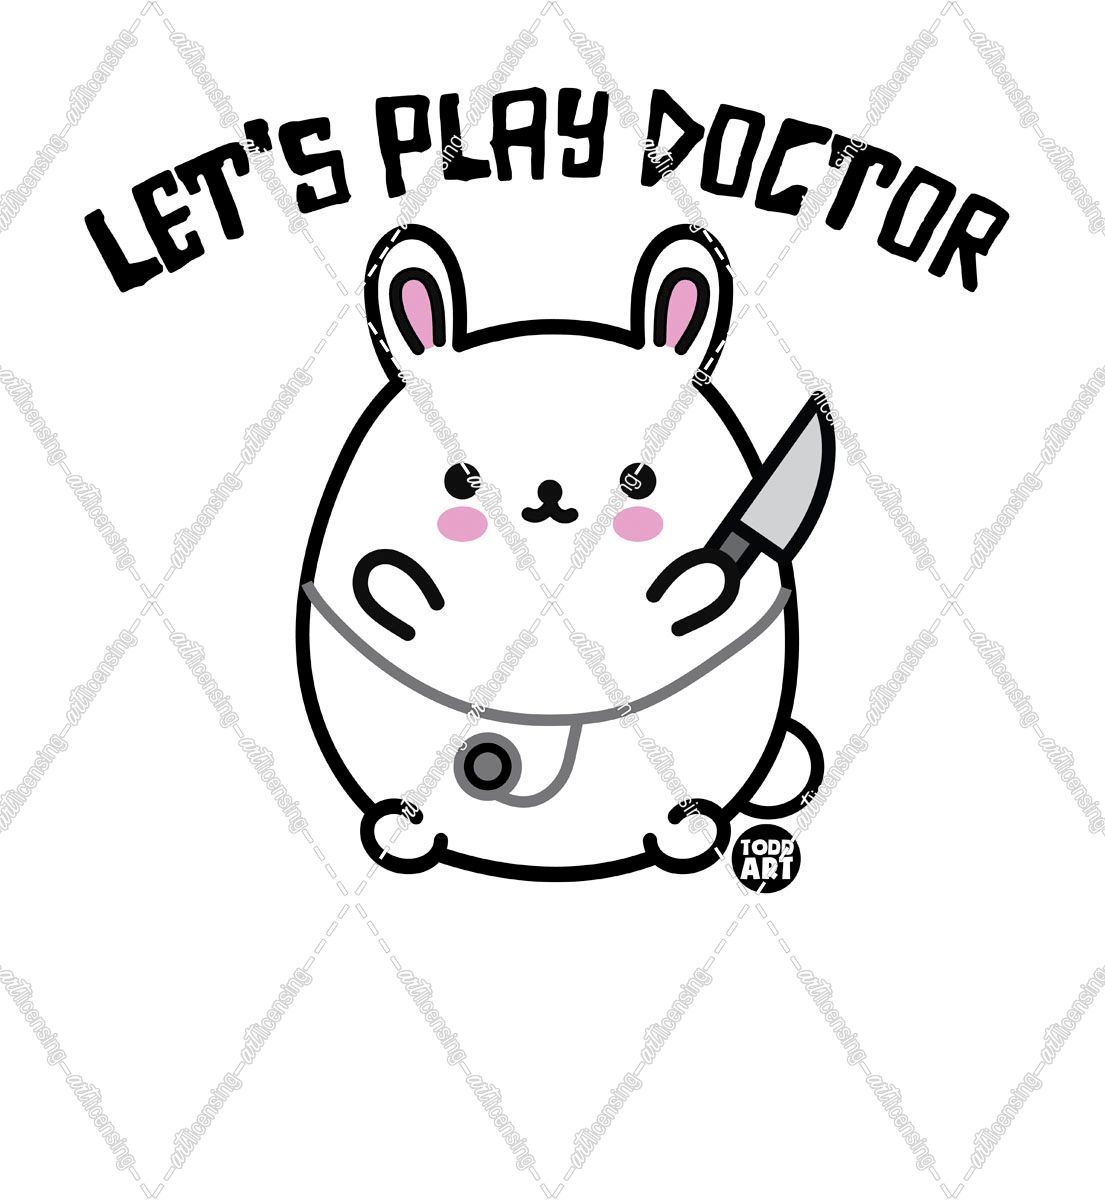 Bad Bunny – Lets Play Doctor